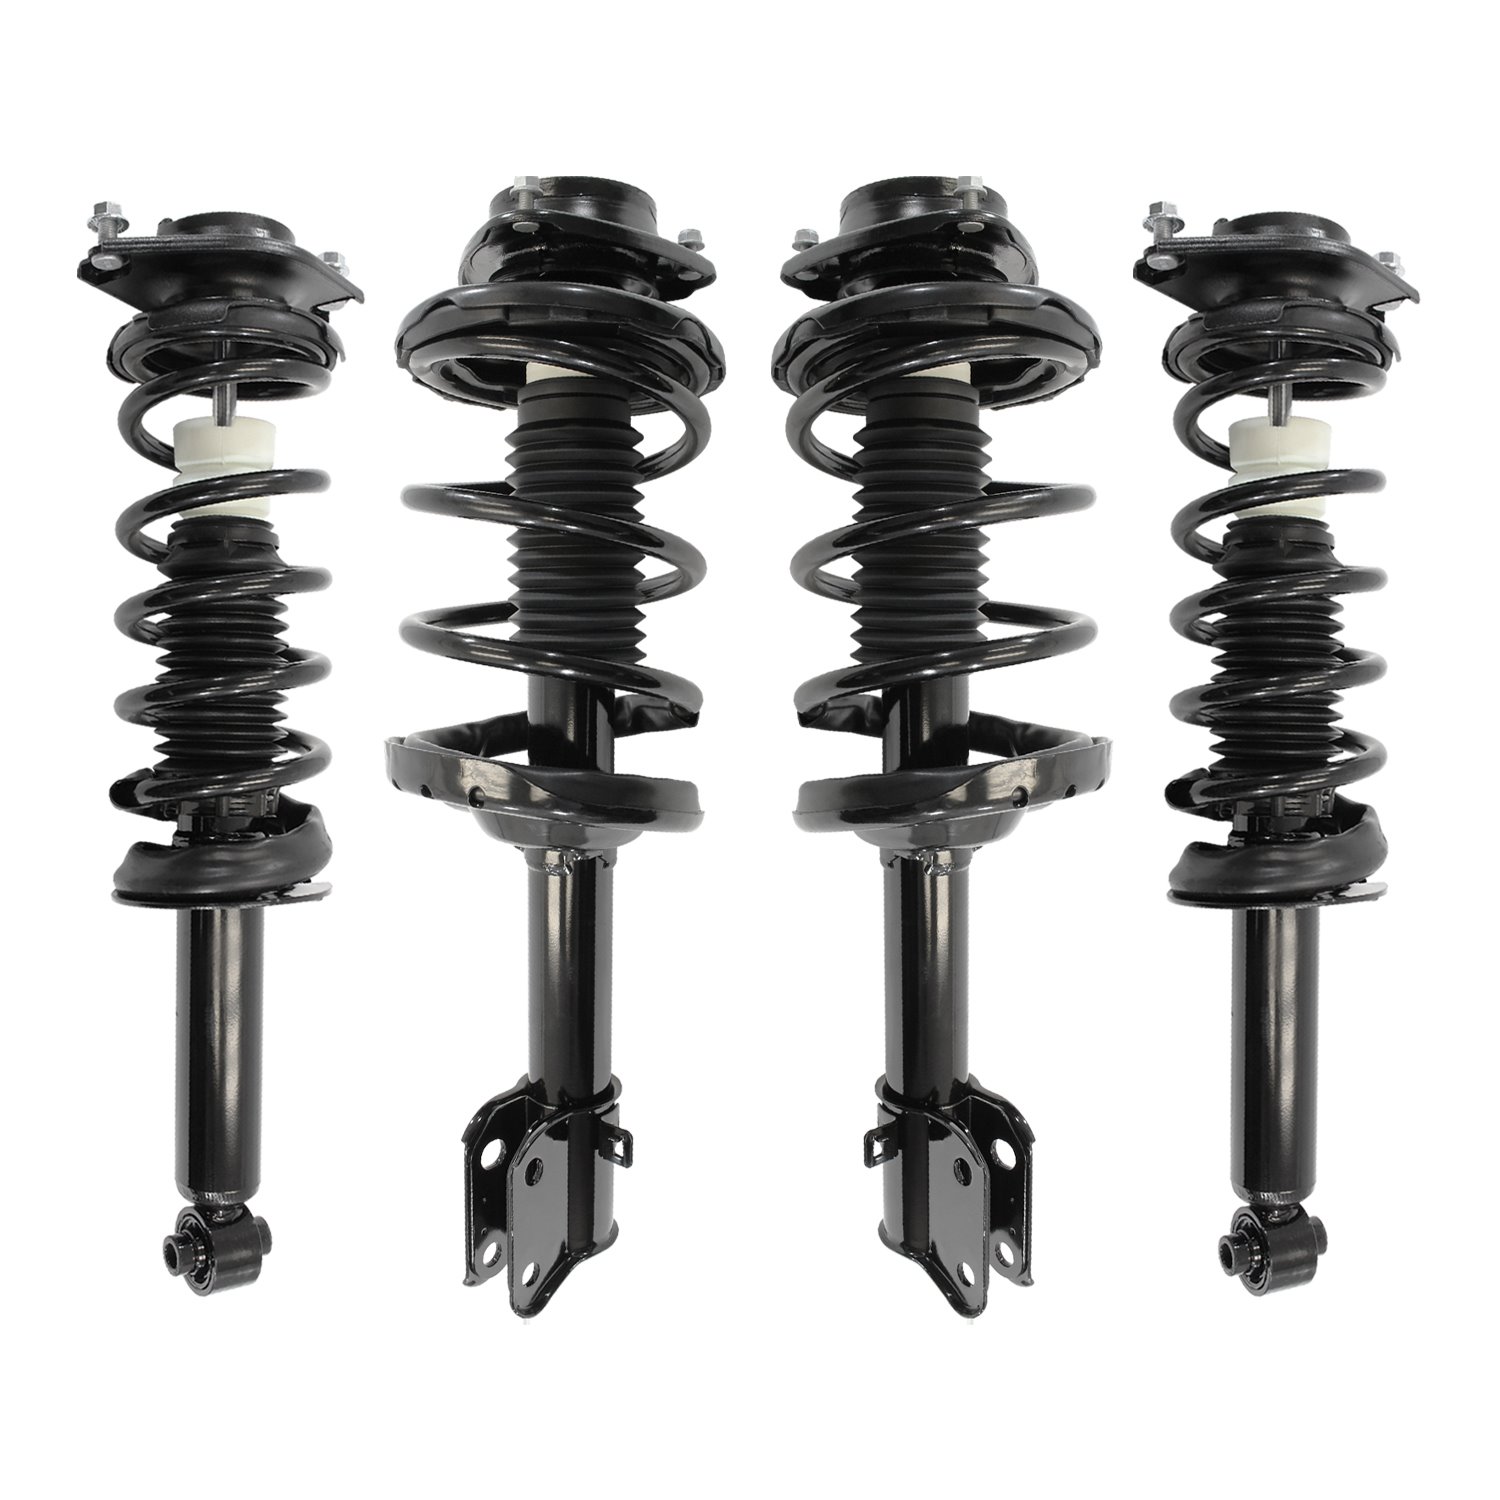 4-13361-16110-001 Front & Rear Suspension Strut & Coil Spring Assembly Kit Fits Select Subaru Outback